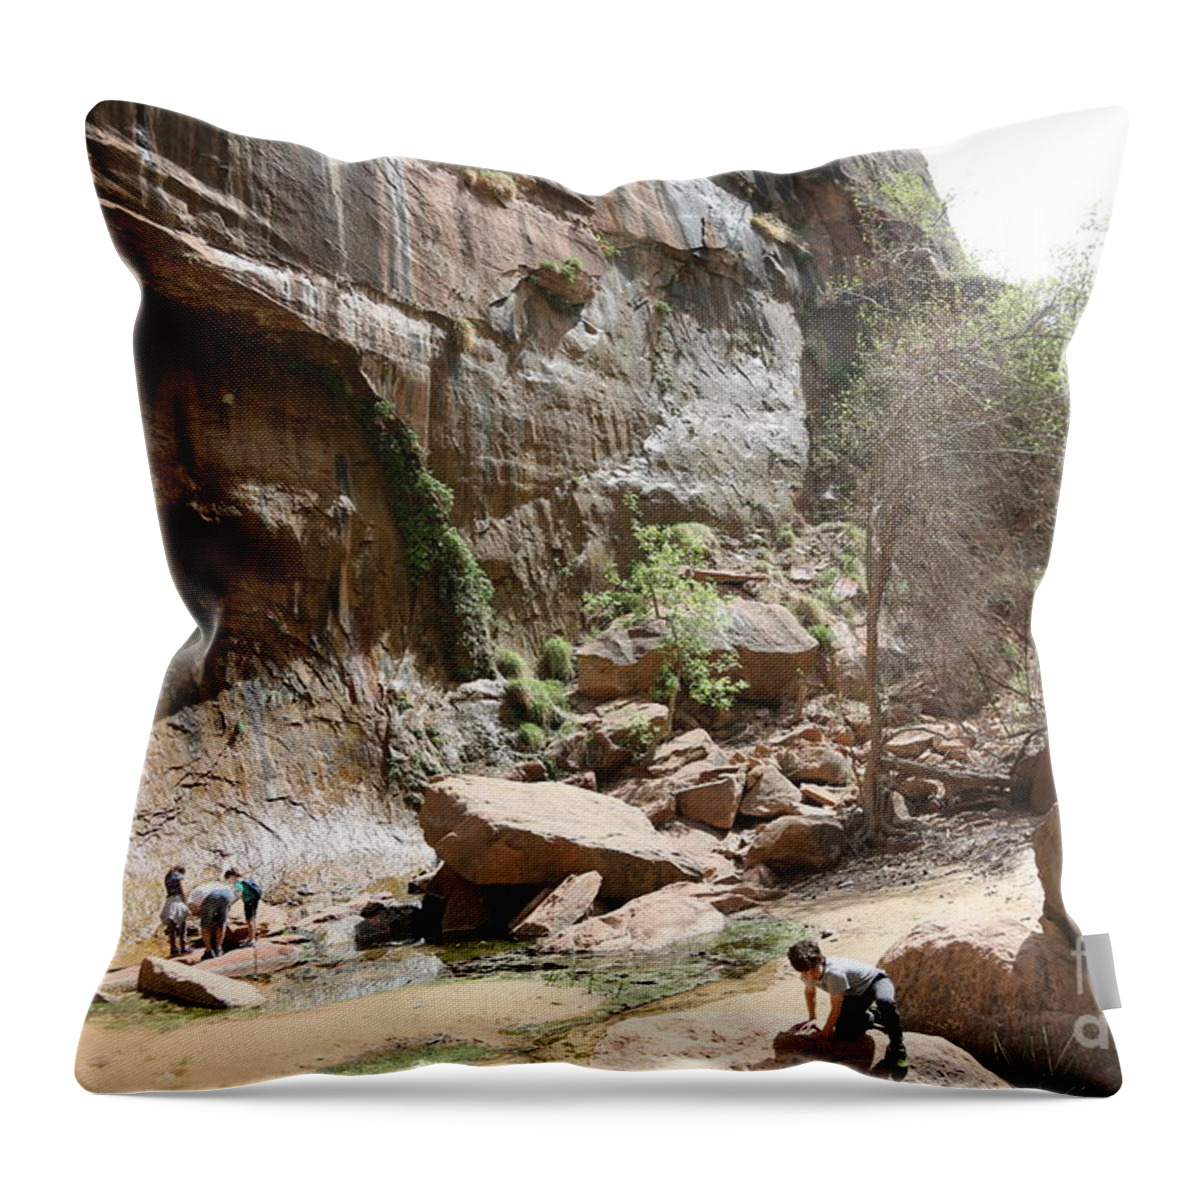 Zion Throw Pillow featuring the photograph Family Zion Natural Park Utah by Chuck Kuhn